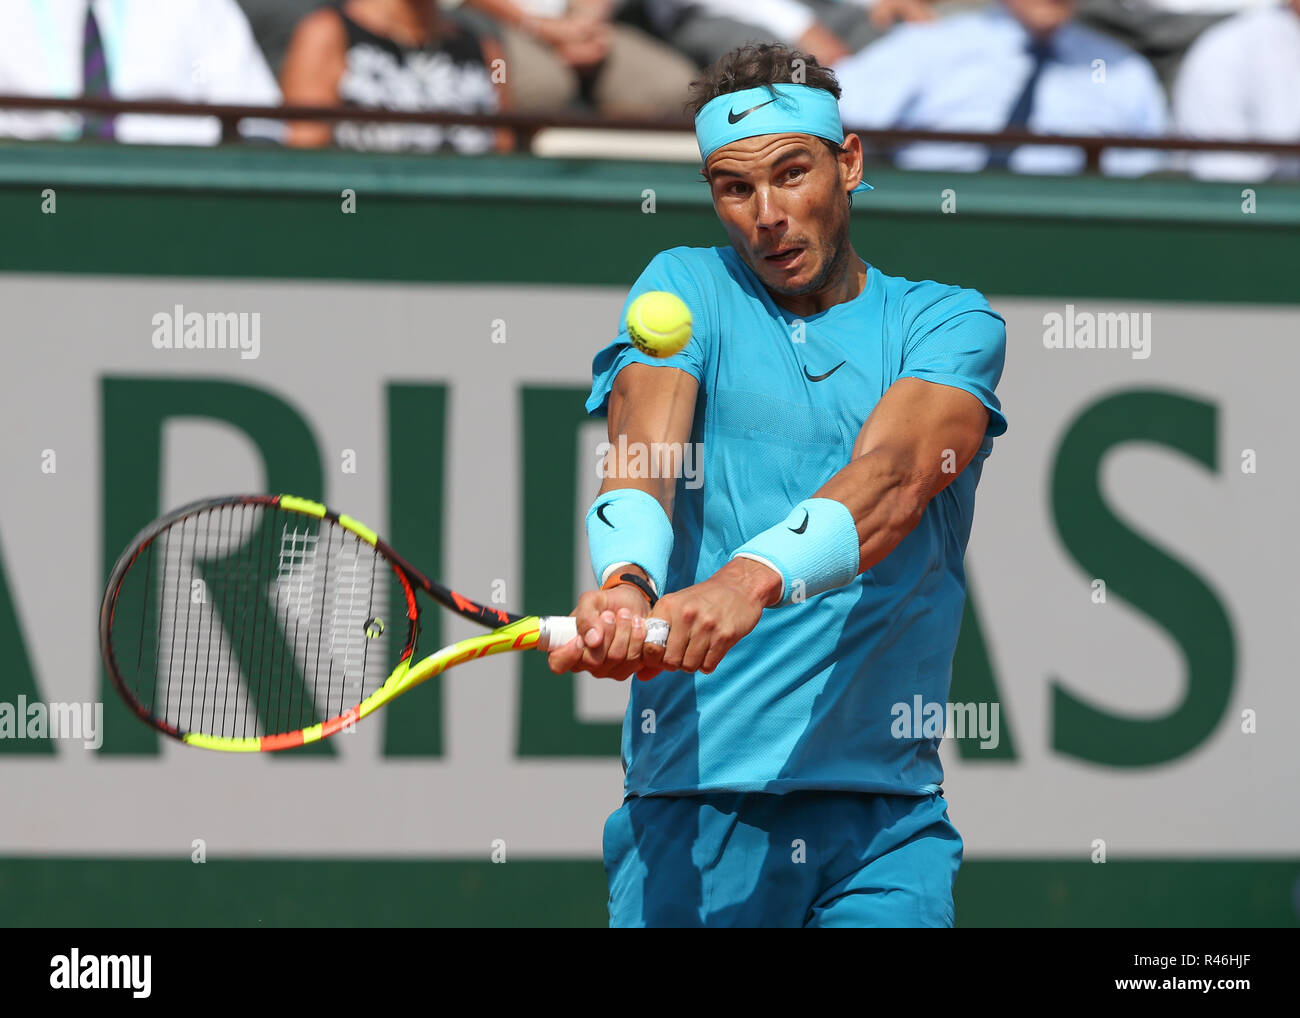 Spanish  tennis player Rafael Nadal  playing backhand shot at the French Open 2018, Paris, France Stock Photo